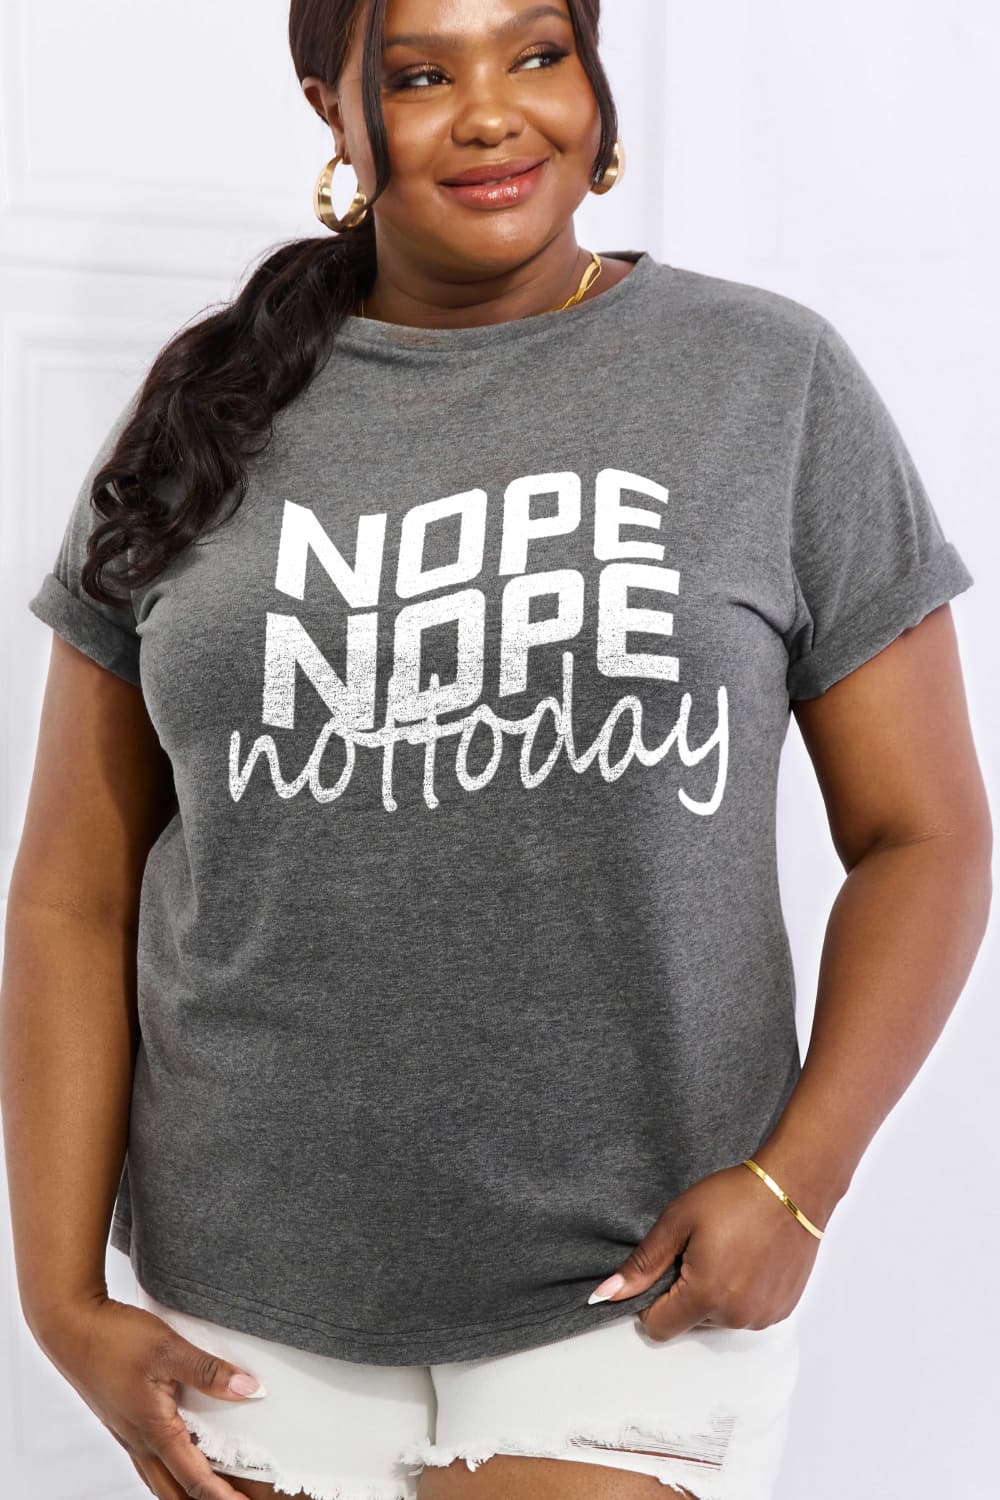 NOPE NOPE NOT TODAY Graphic Cotton Tee - Gray / S - T-Shirts - Shirts & Tops - 13 - 2024